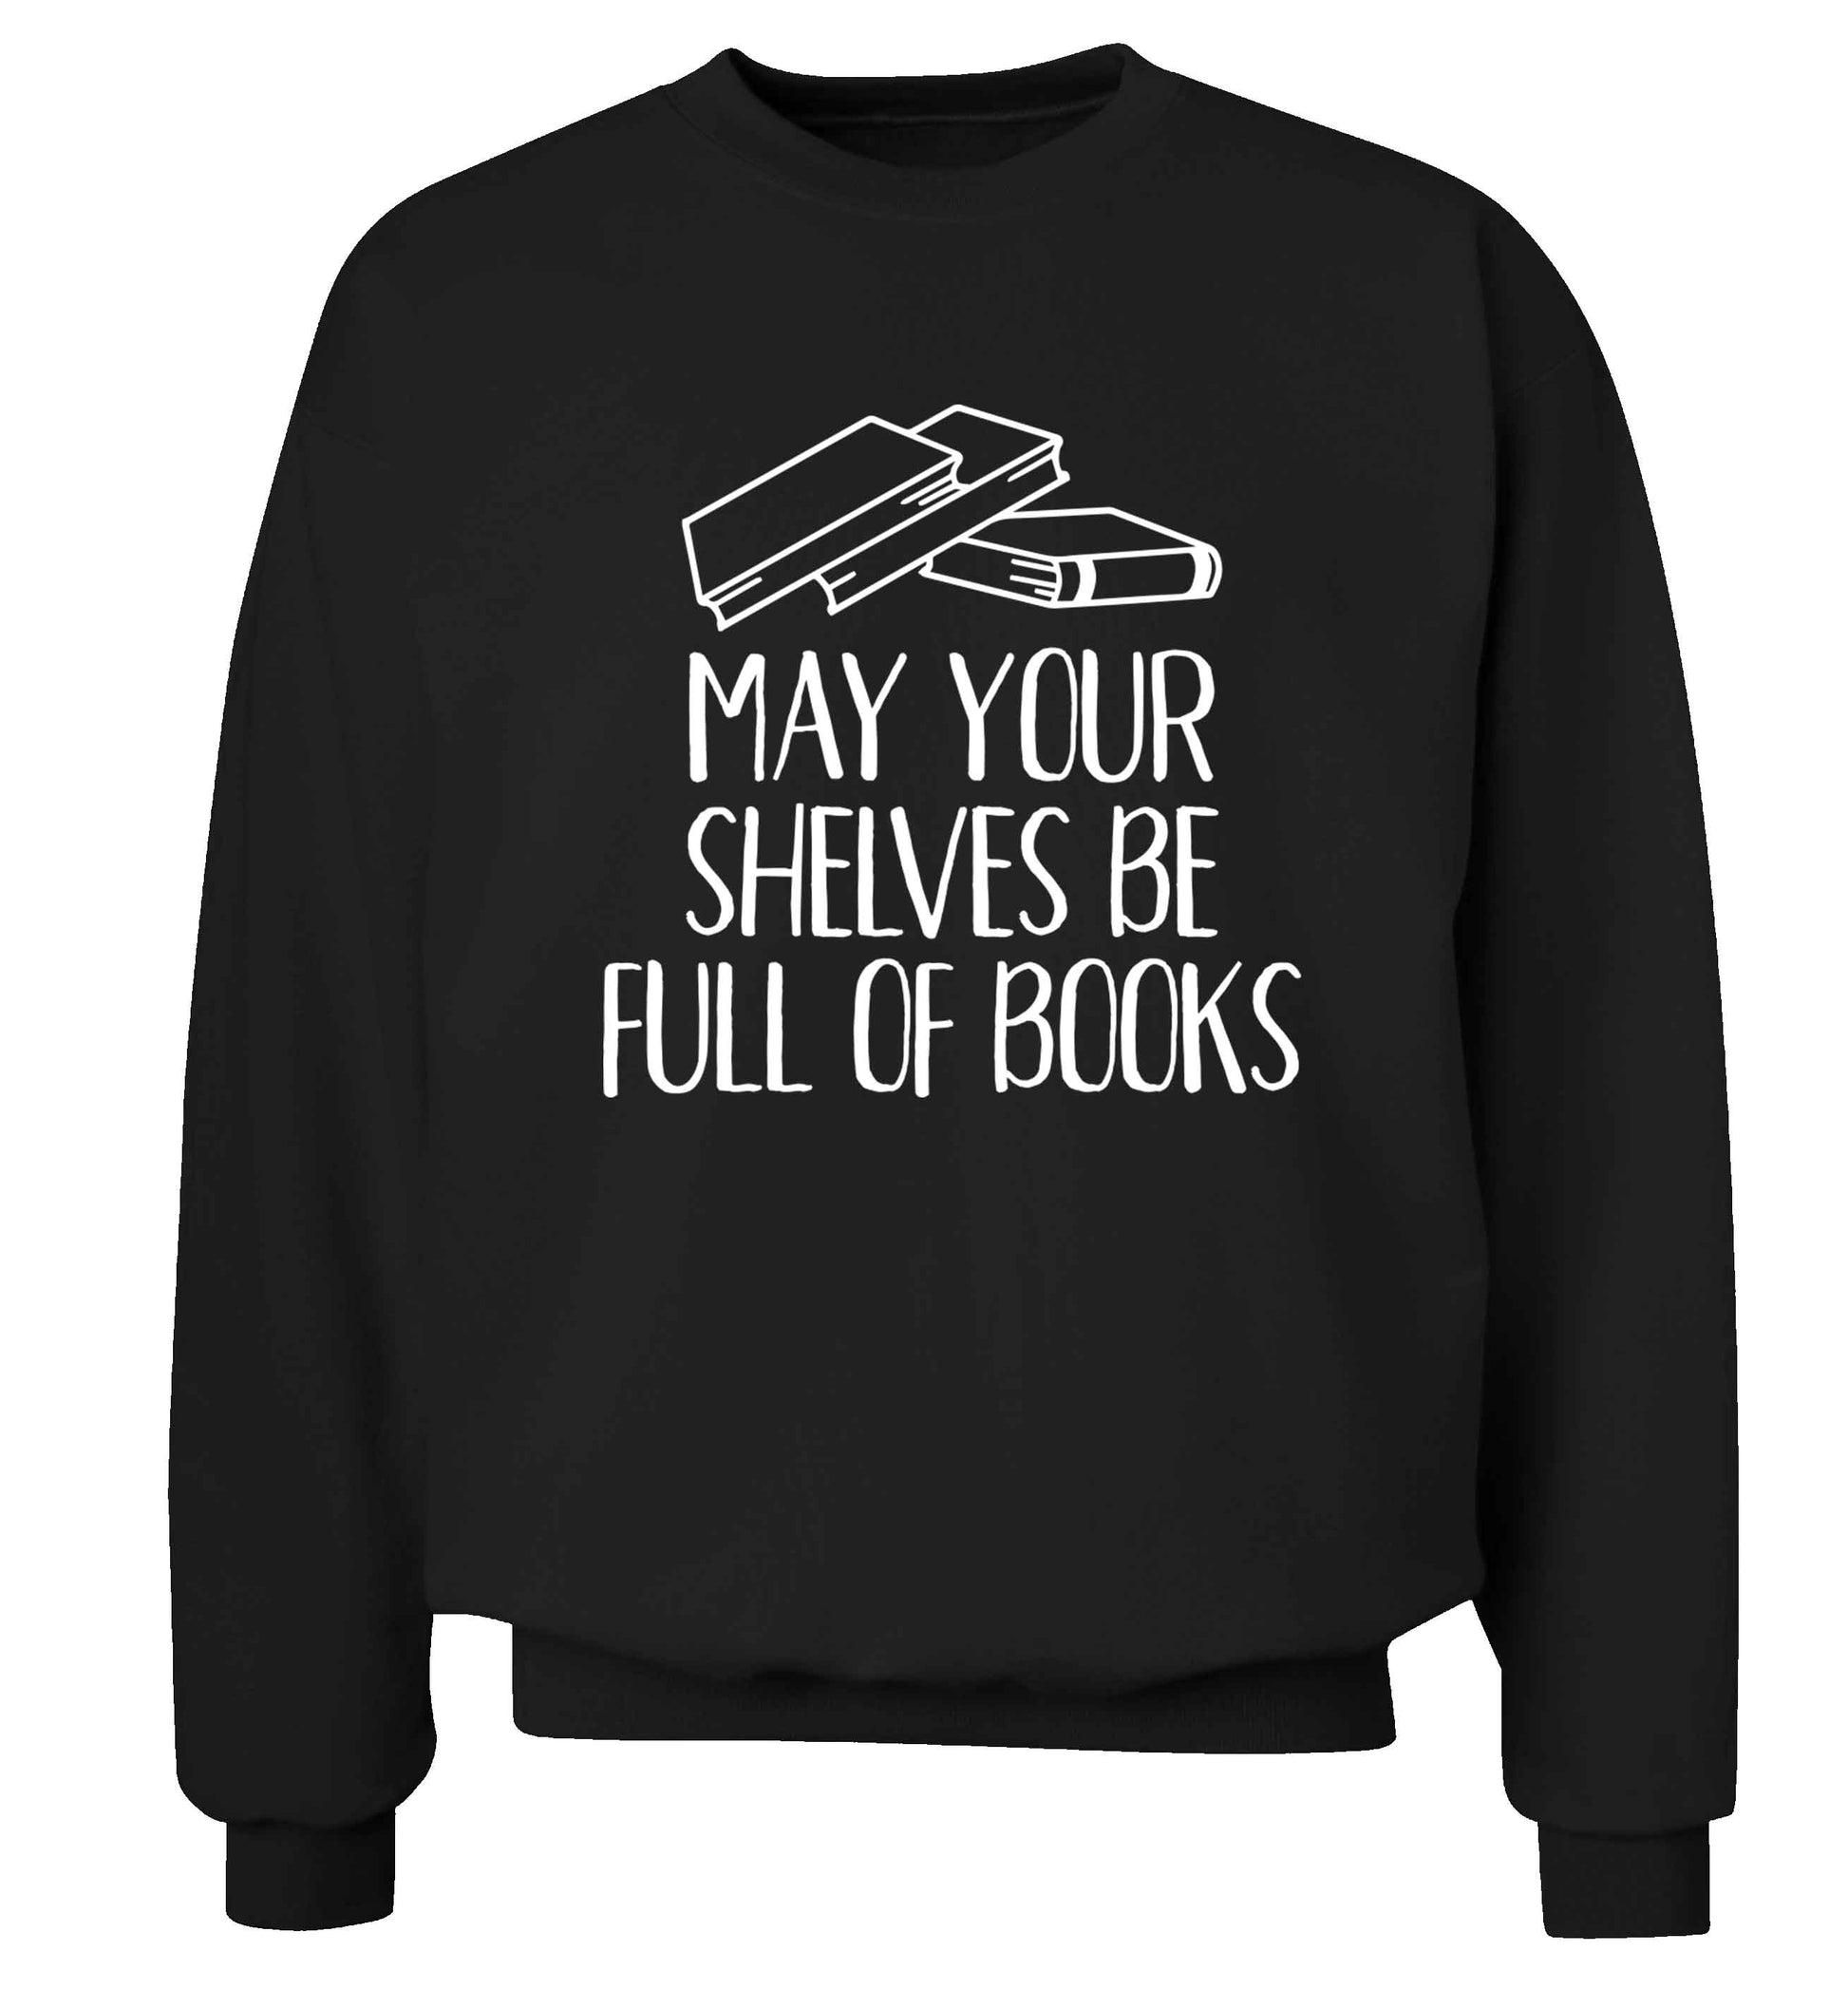 May your shelves be full of books Adult's unisex black Sweater 2XL